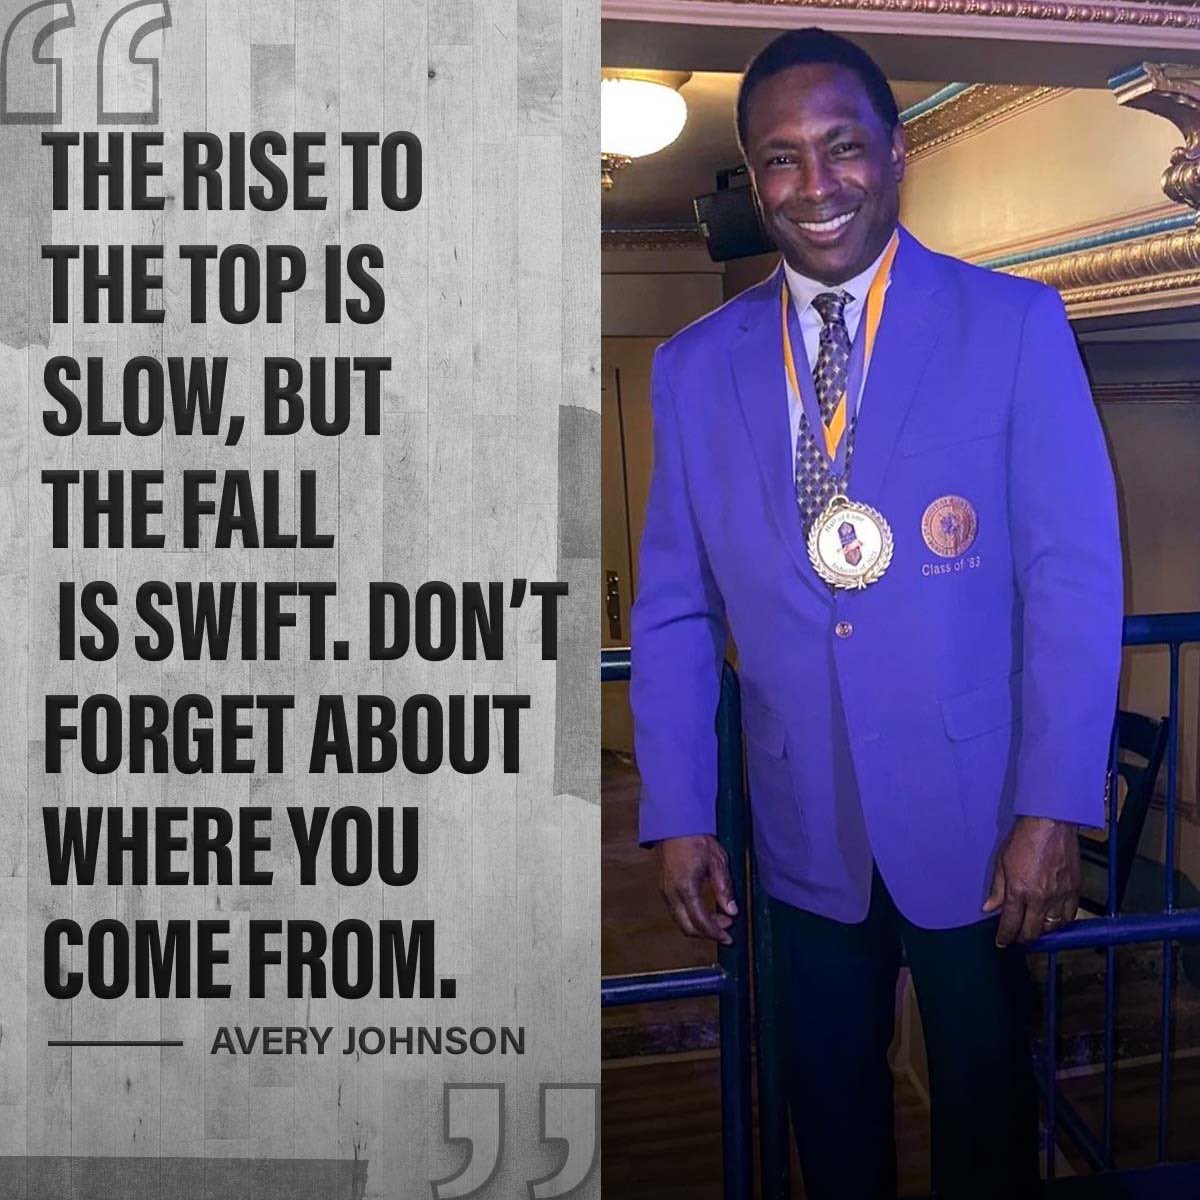 Success requires perseverance, but it can vanish in an instant. Reflect on your journey, the lessons, and those who helped. Stay humble and grounded to preserve your values amid success's trials. #CoachAvery #StayHumble